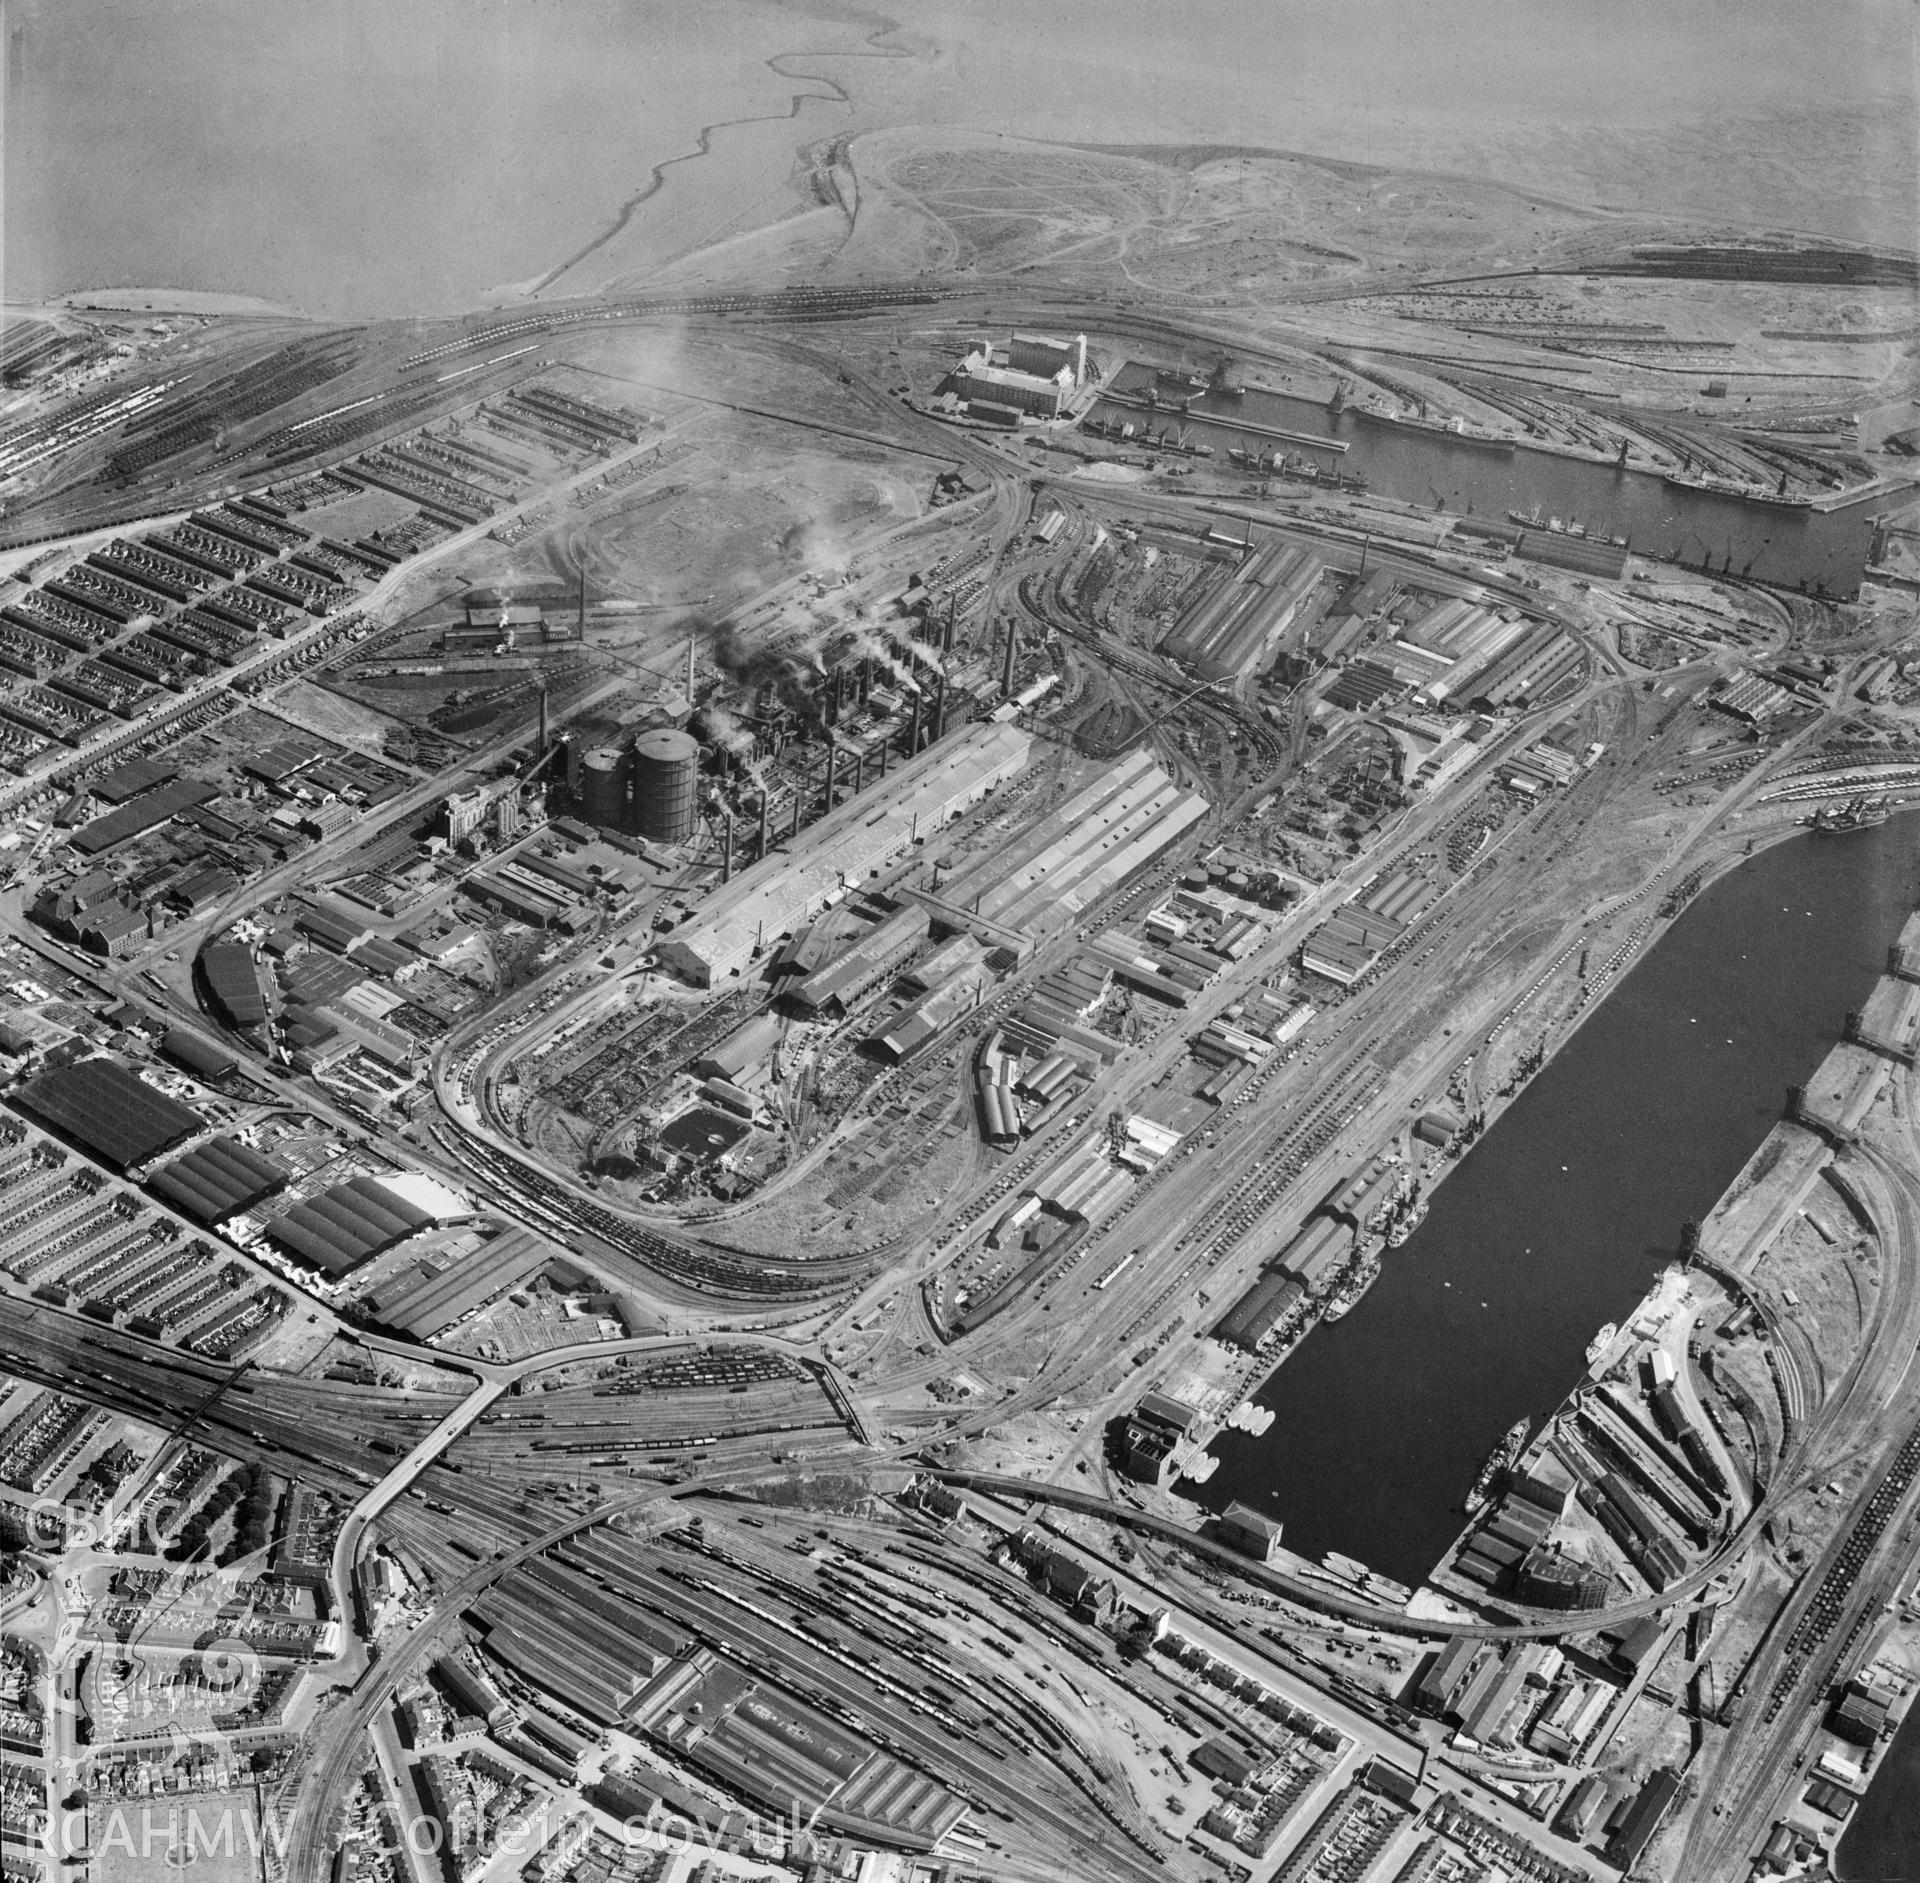 General view of the East Moors area of Cardiff showing Roath and East Bute docks. Oblique aerial photograph, 5?" cut roll film.